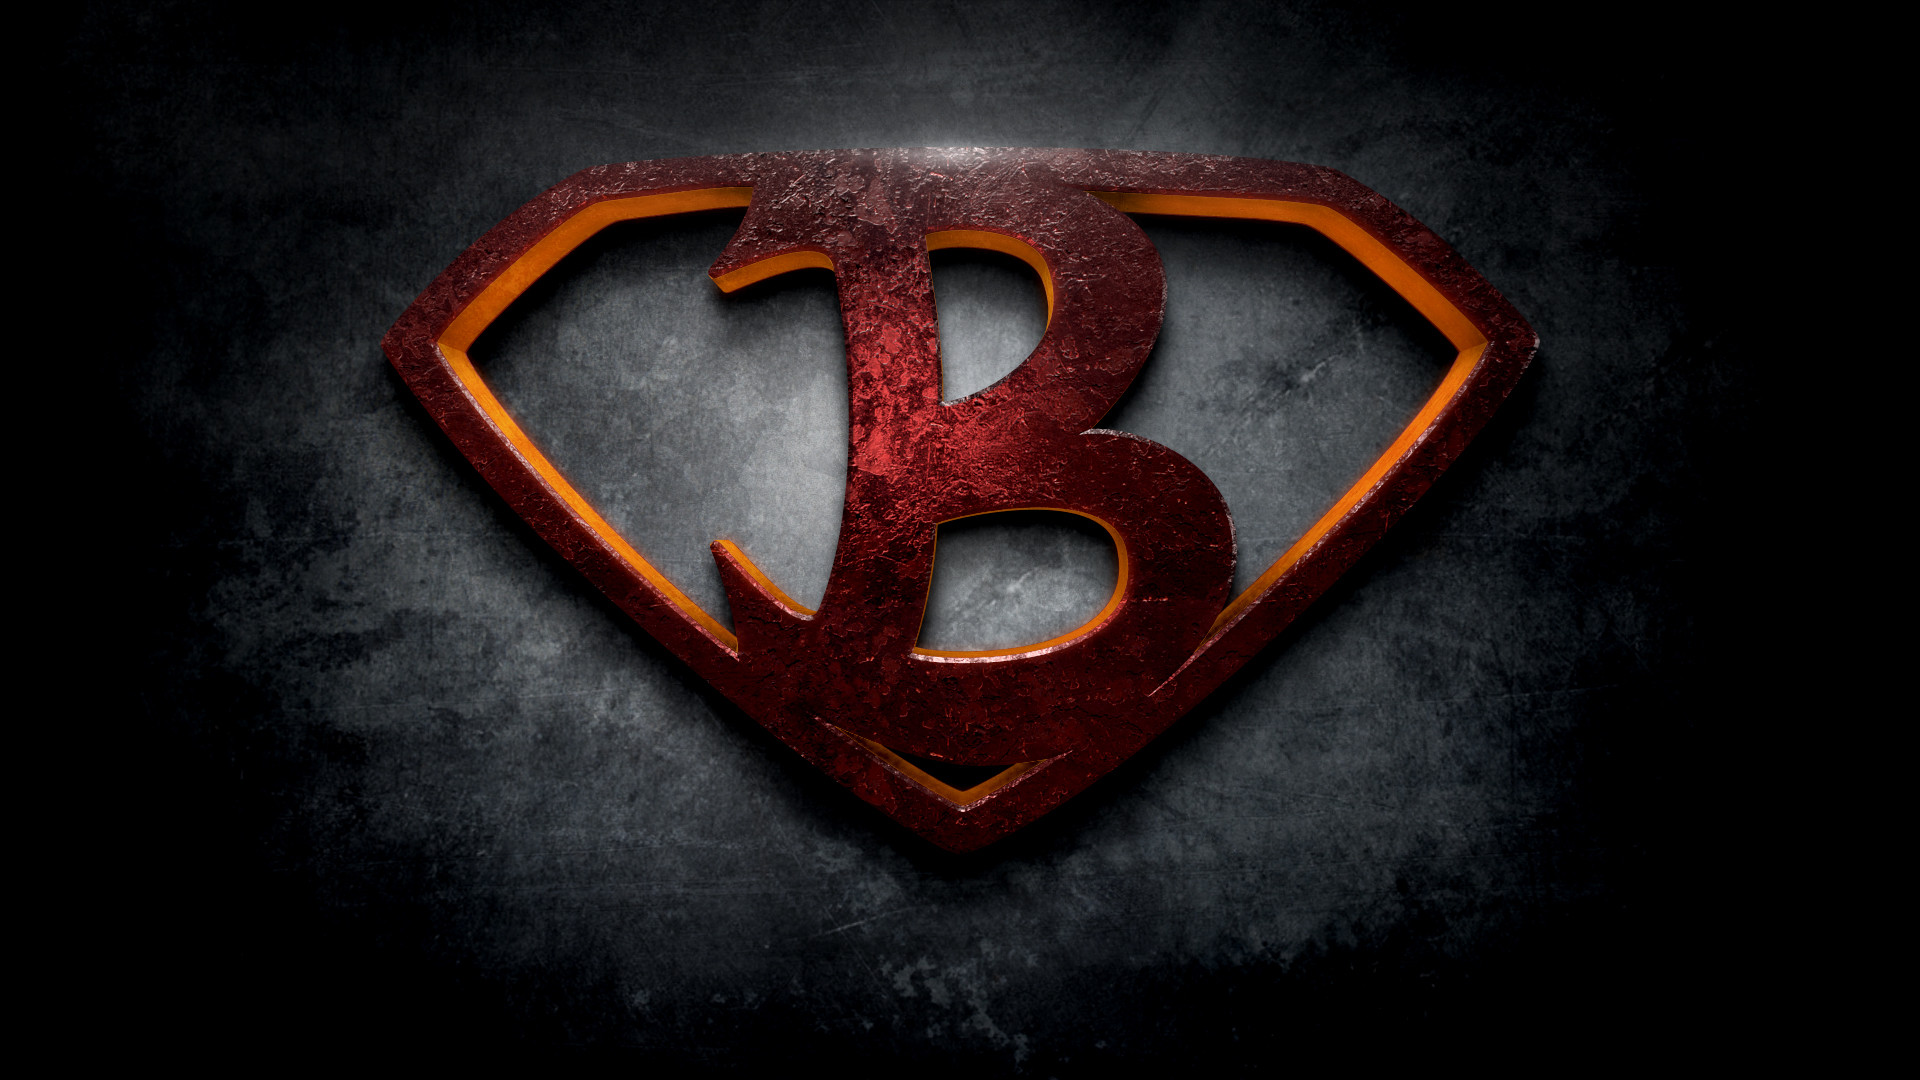 1920x1080 Letter B Wallpapers Logos The letter b in the style of